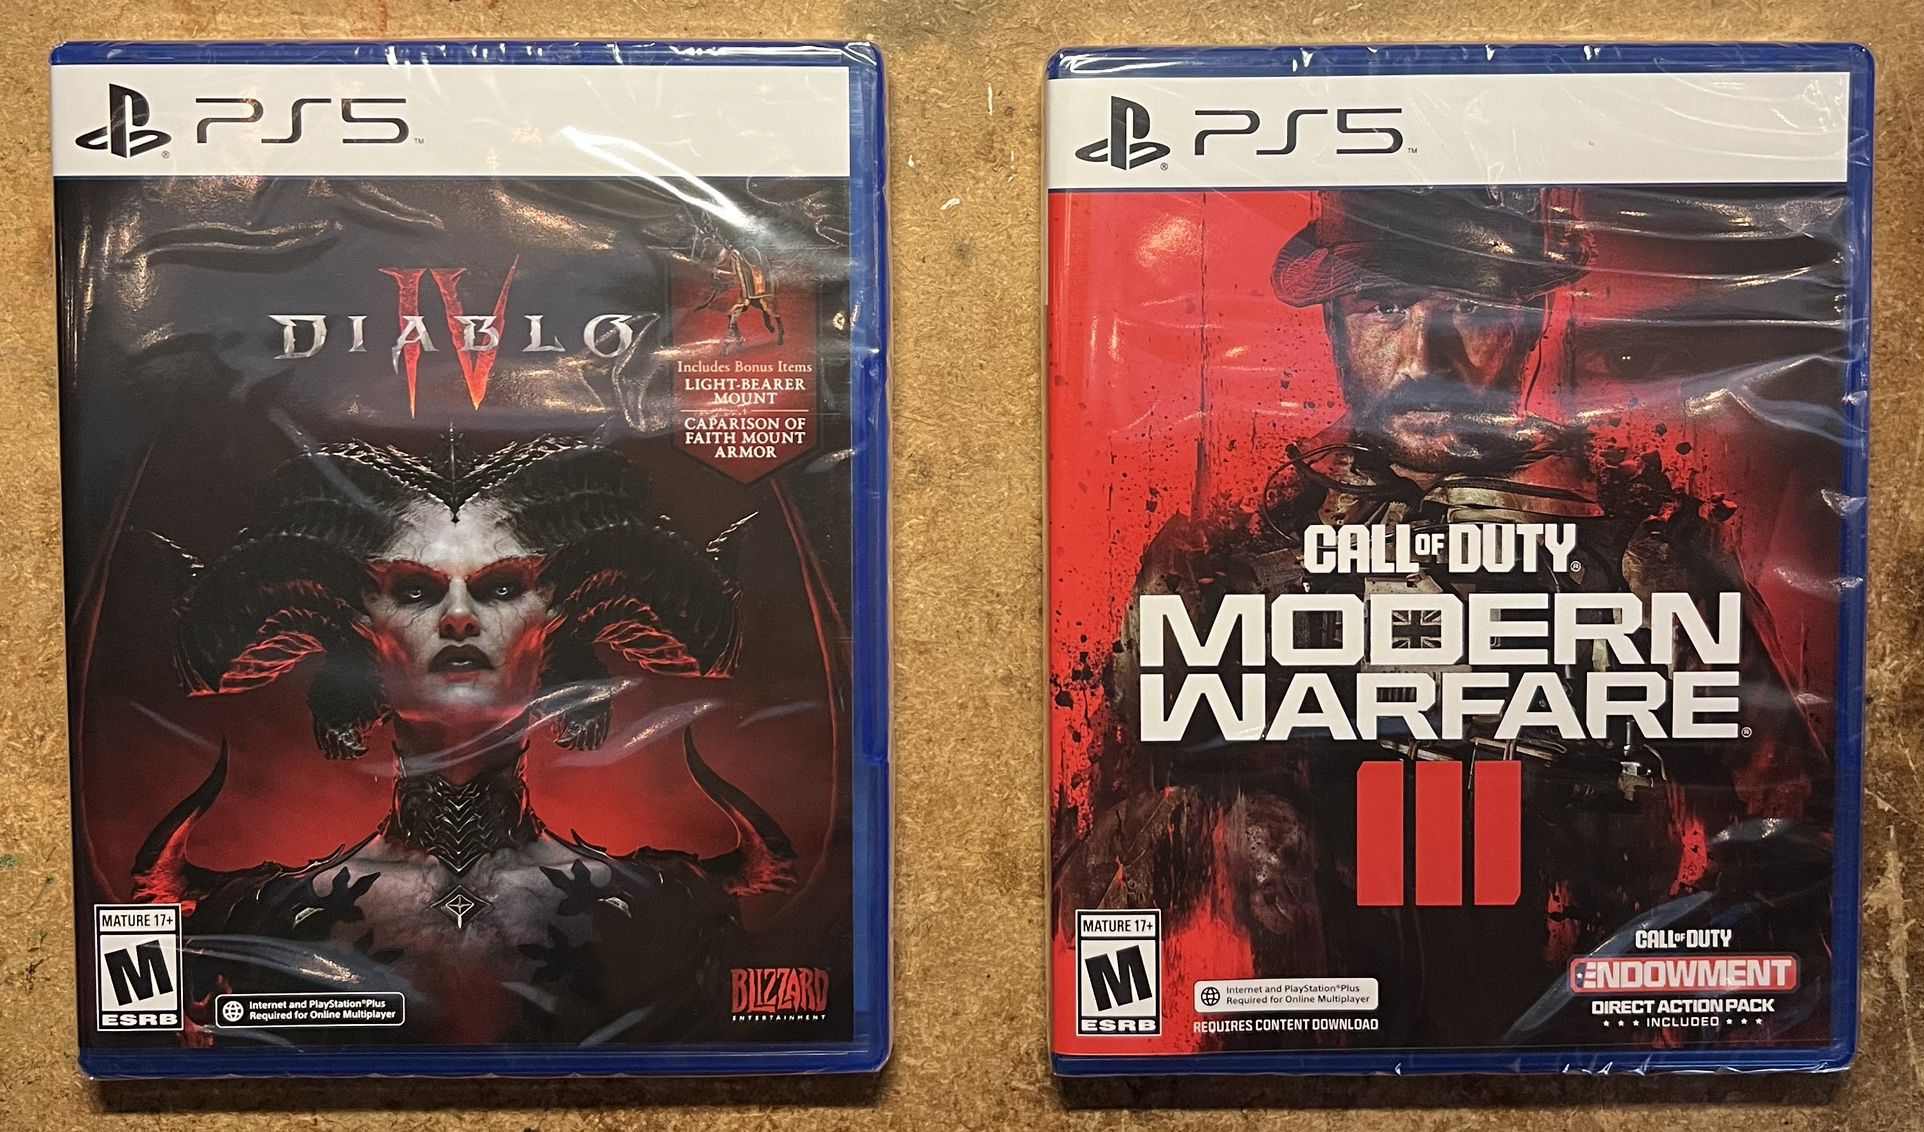 PS5 Video Games. New. Unopened. Call of Duty III Modern Warfare and Diablo IV $40 each. Both for $70